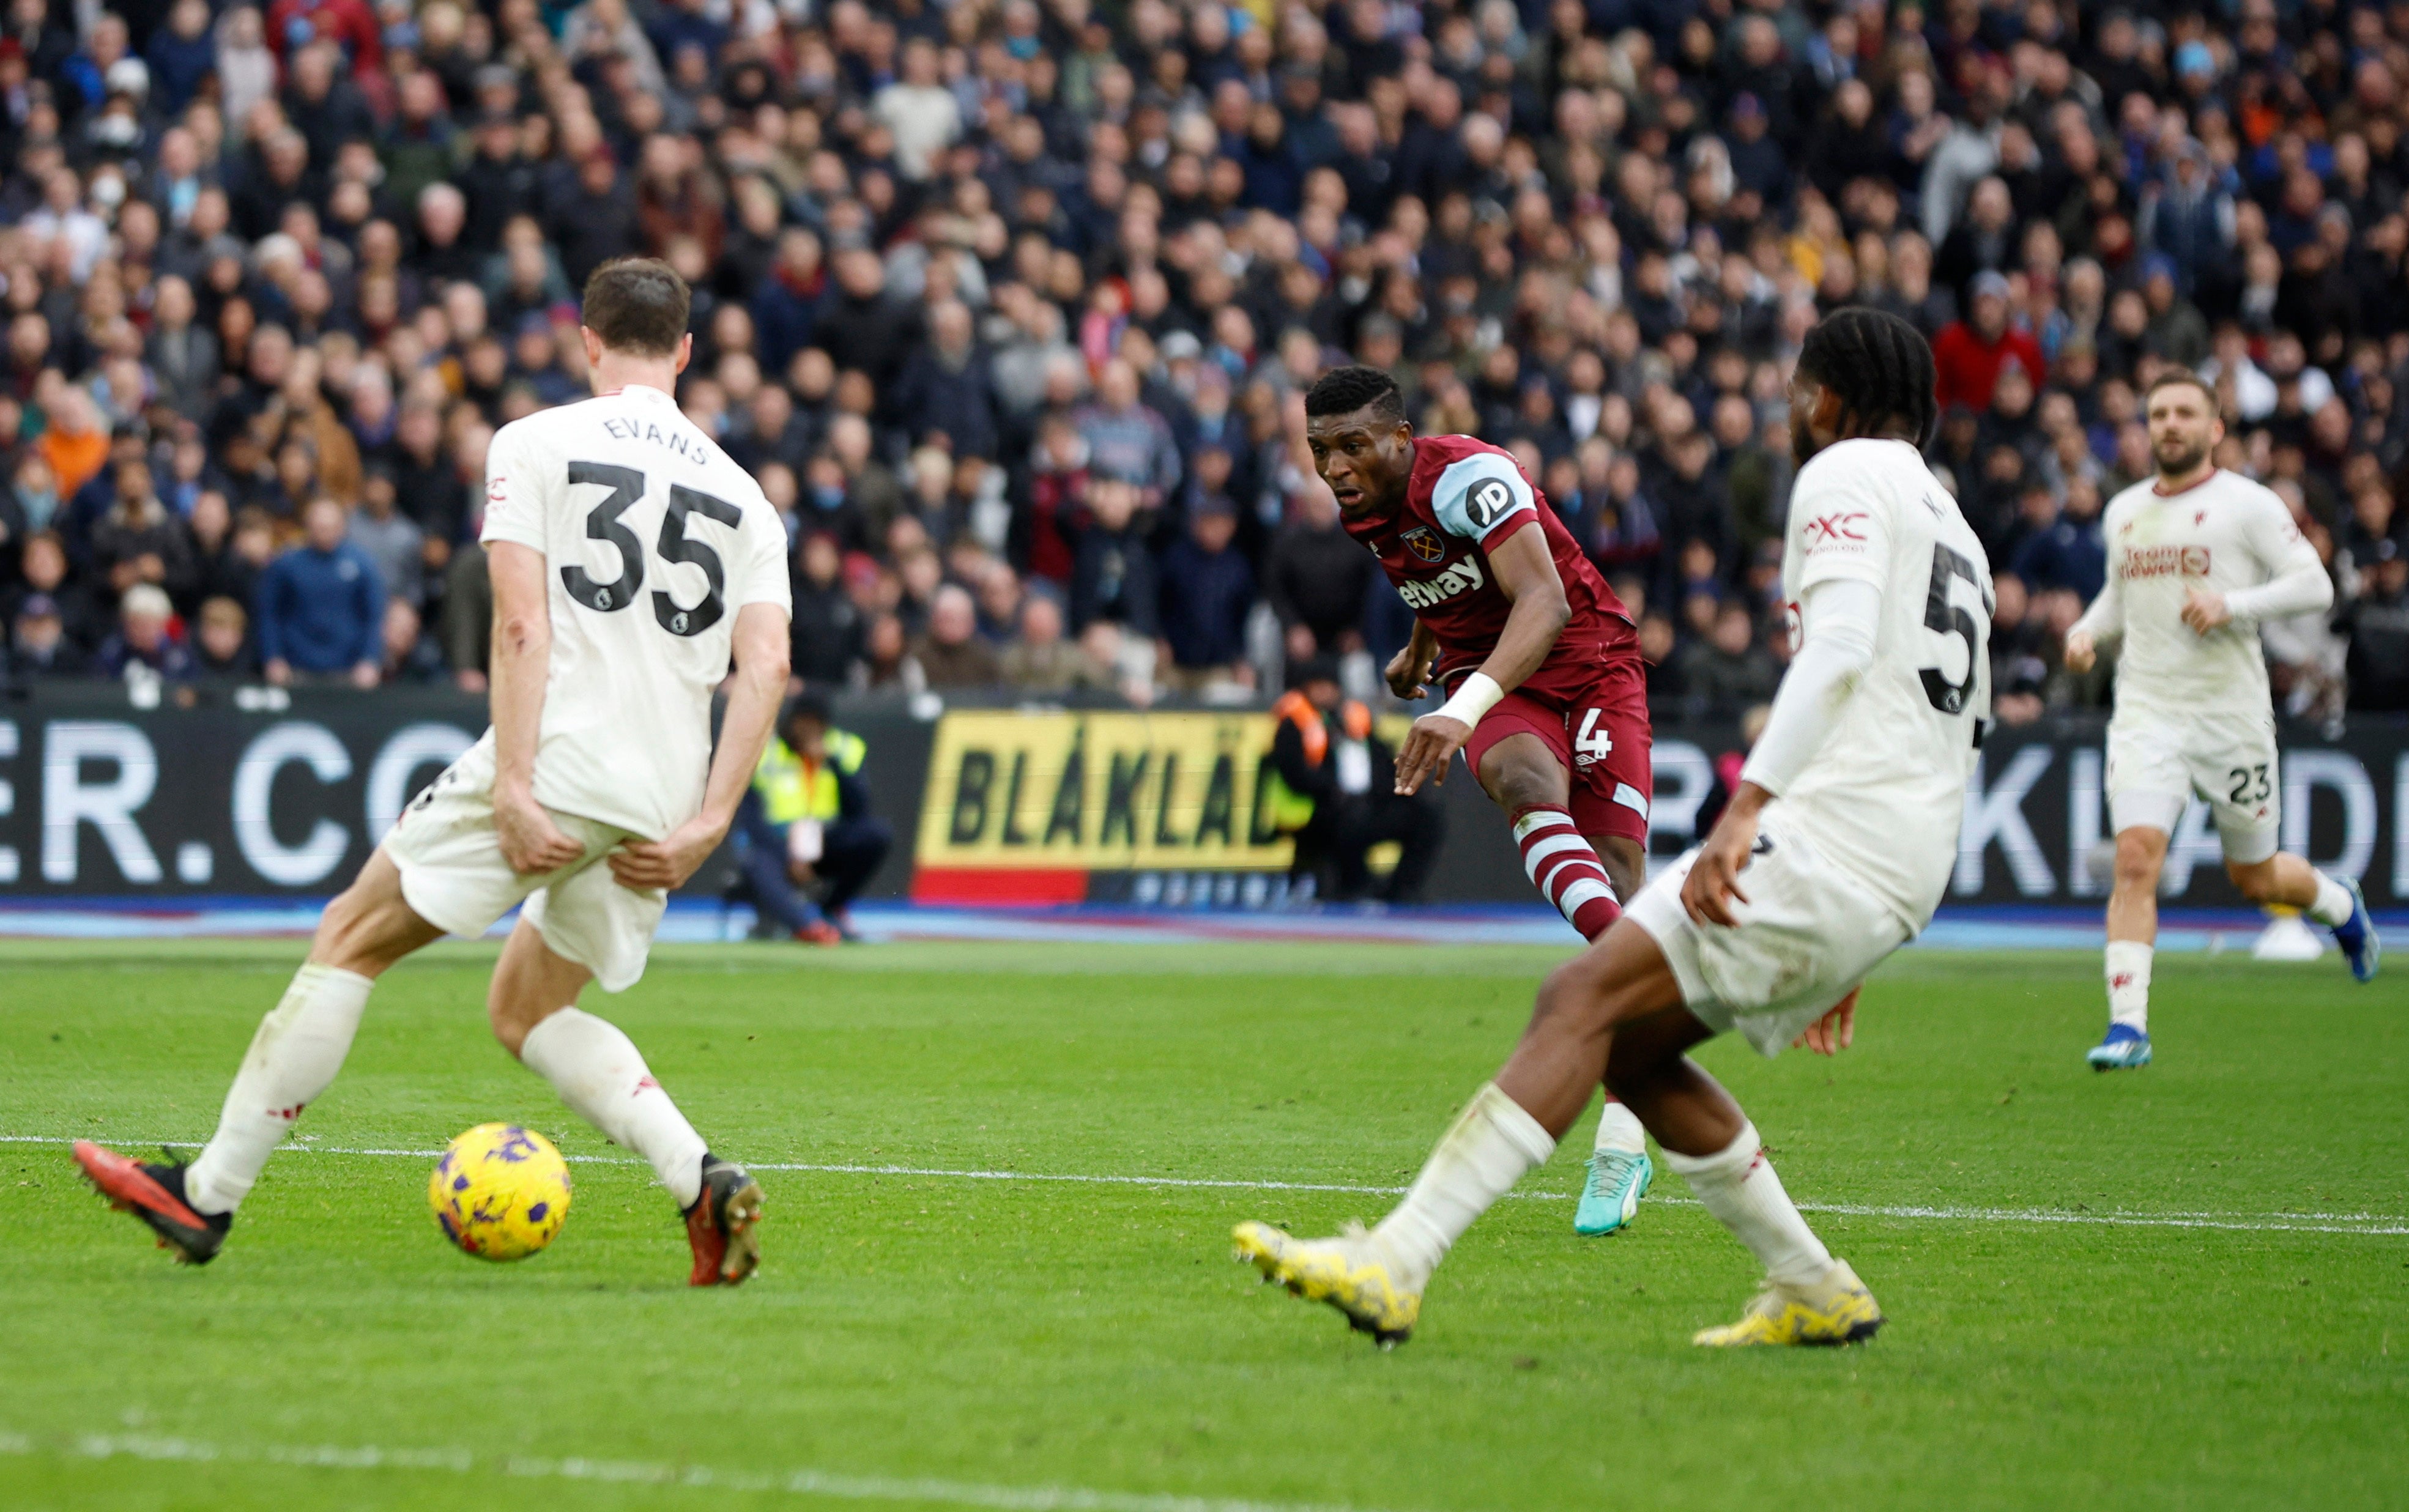 Mohammed Kudus fires home West Ham’s second goal